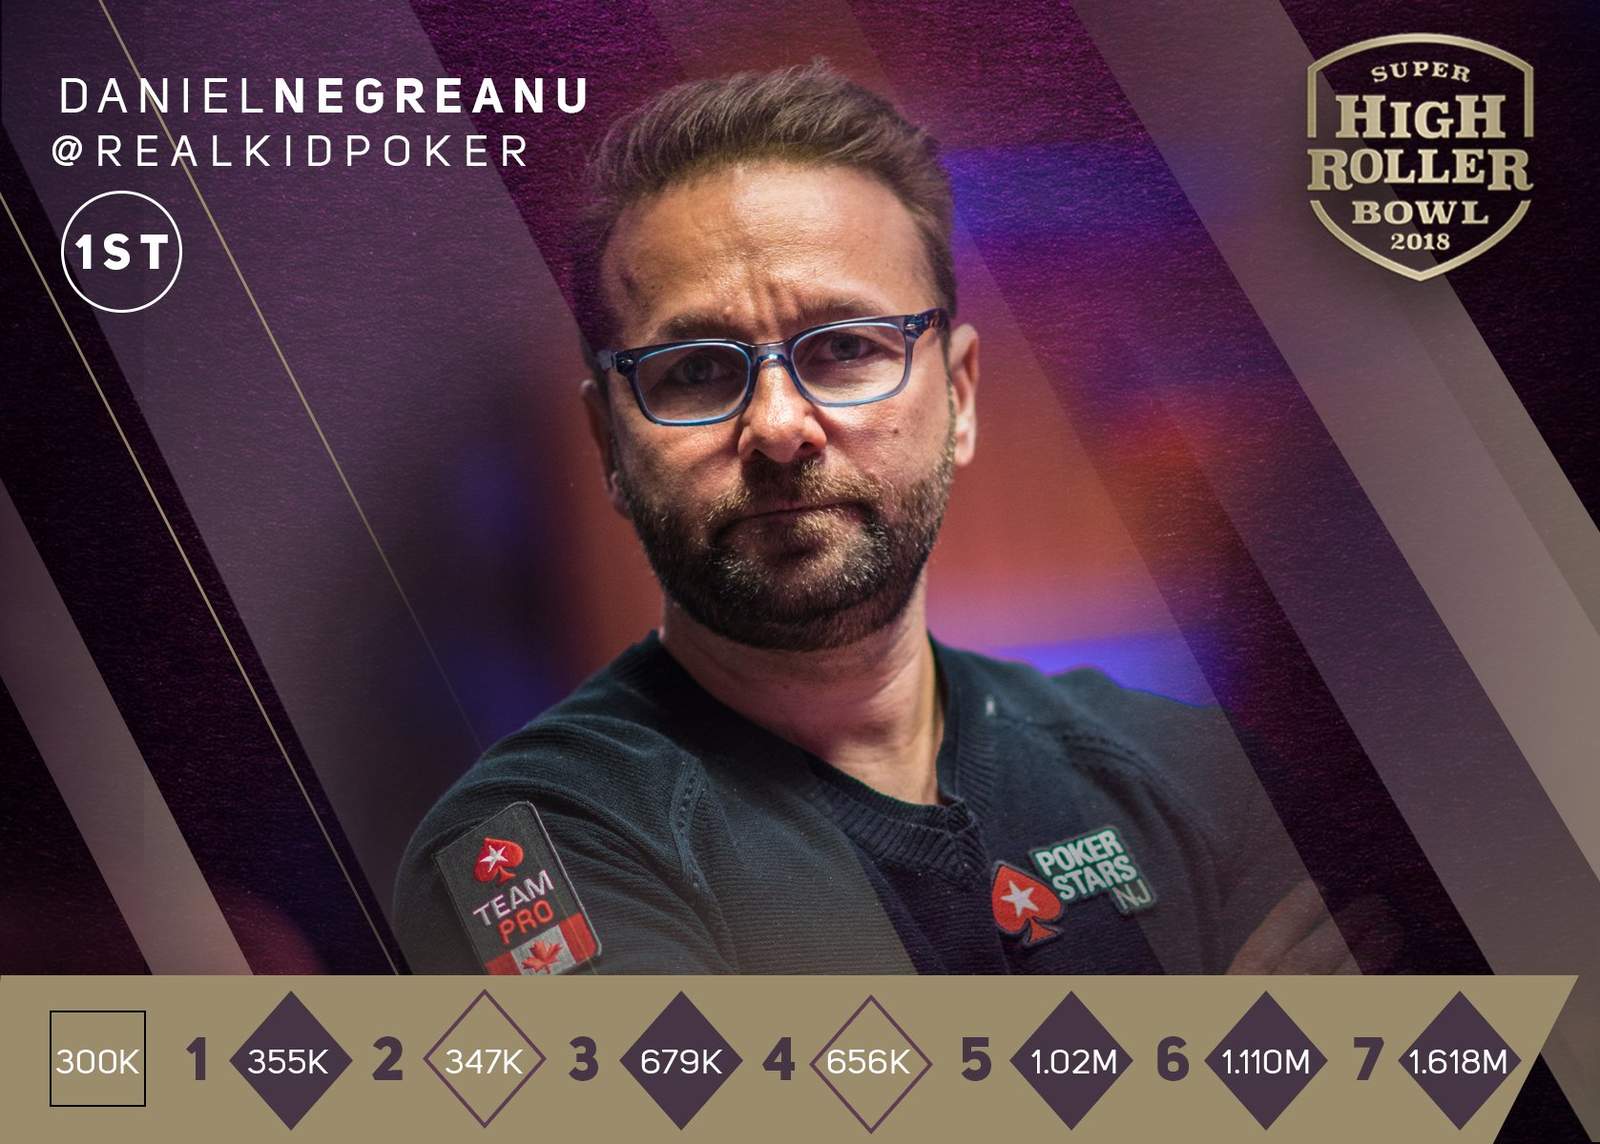 Super High Roller Bowl: Daniel Negreanu Finishes On Top of Day 1 on PokerGO